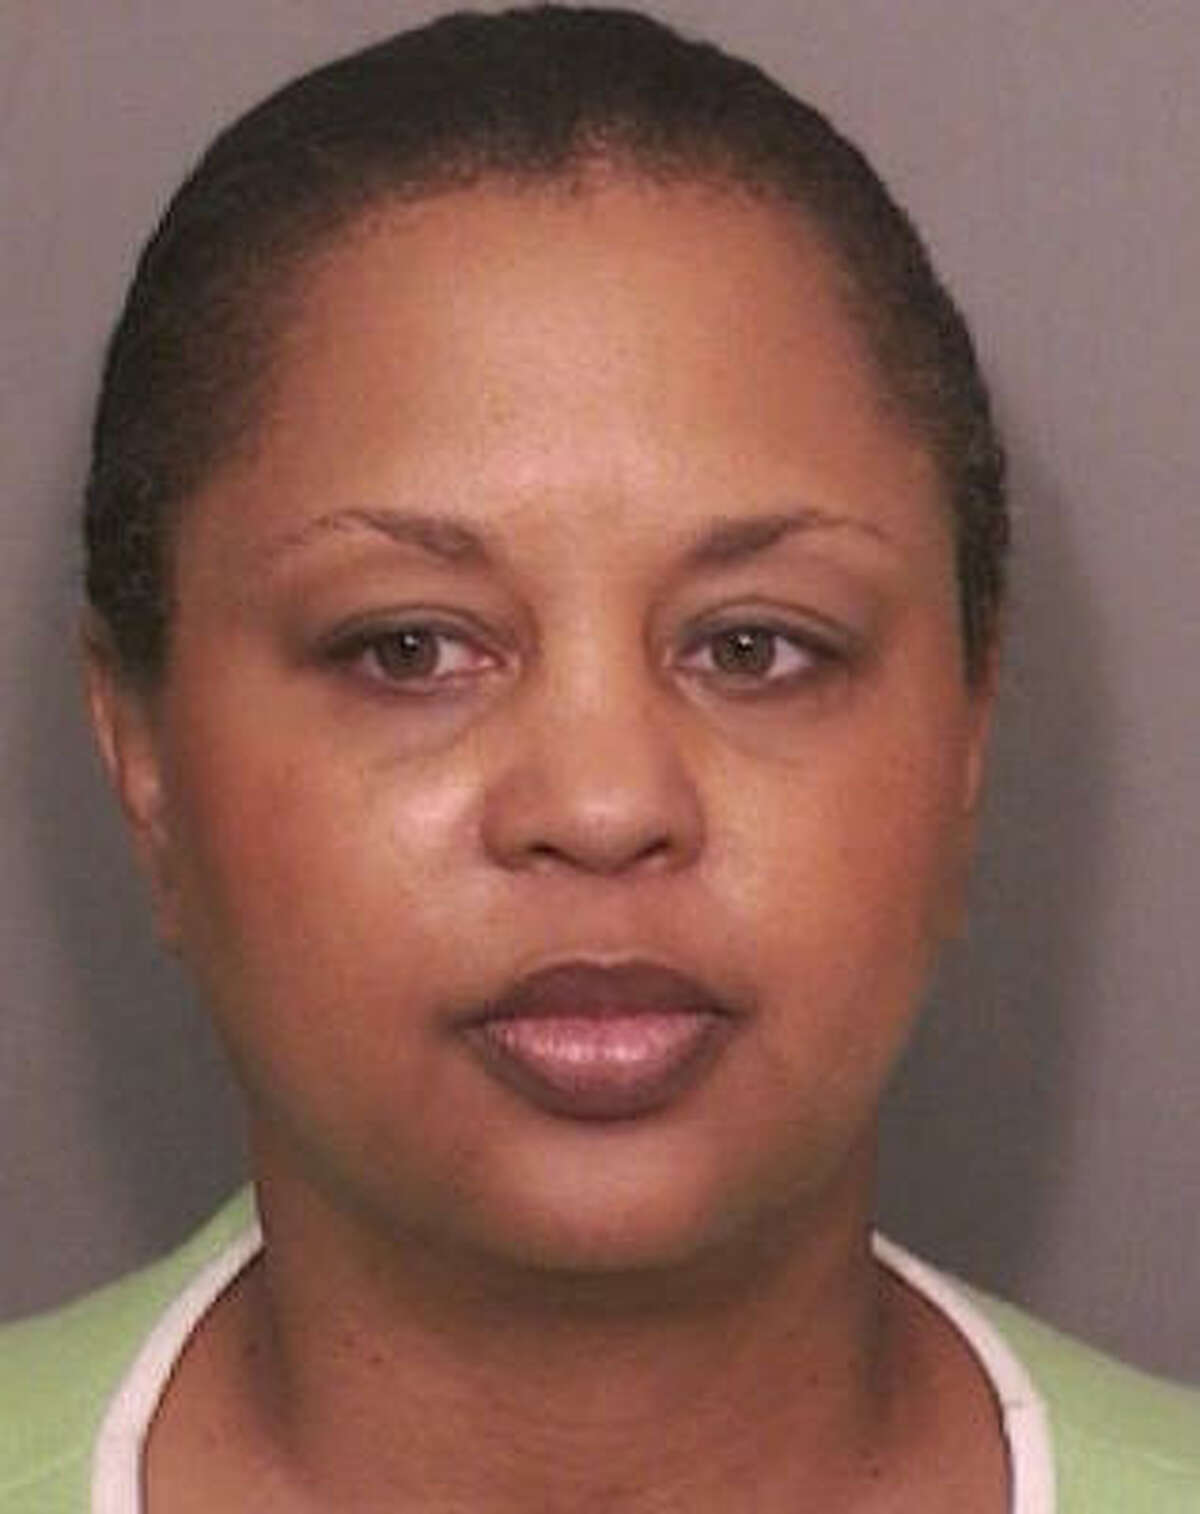 Cheryl Turner, a former Harris County district attorney and ex-wife of state Rep. Sylvester Turner, pleaded guilty to breach of fiduciary trust and was sentenced to 10 years in prison.